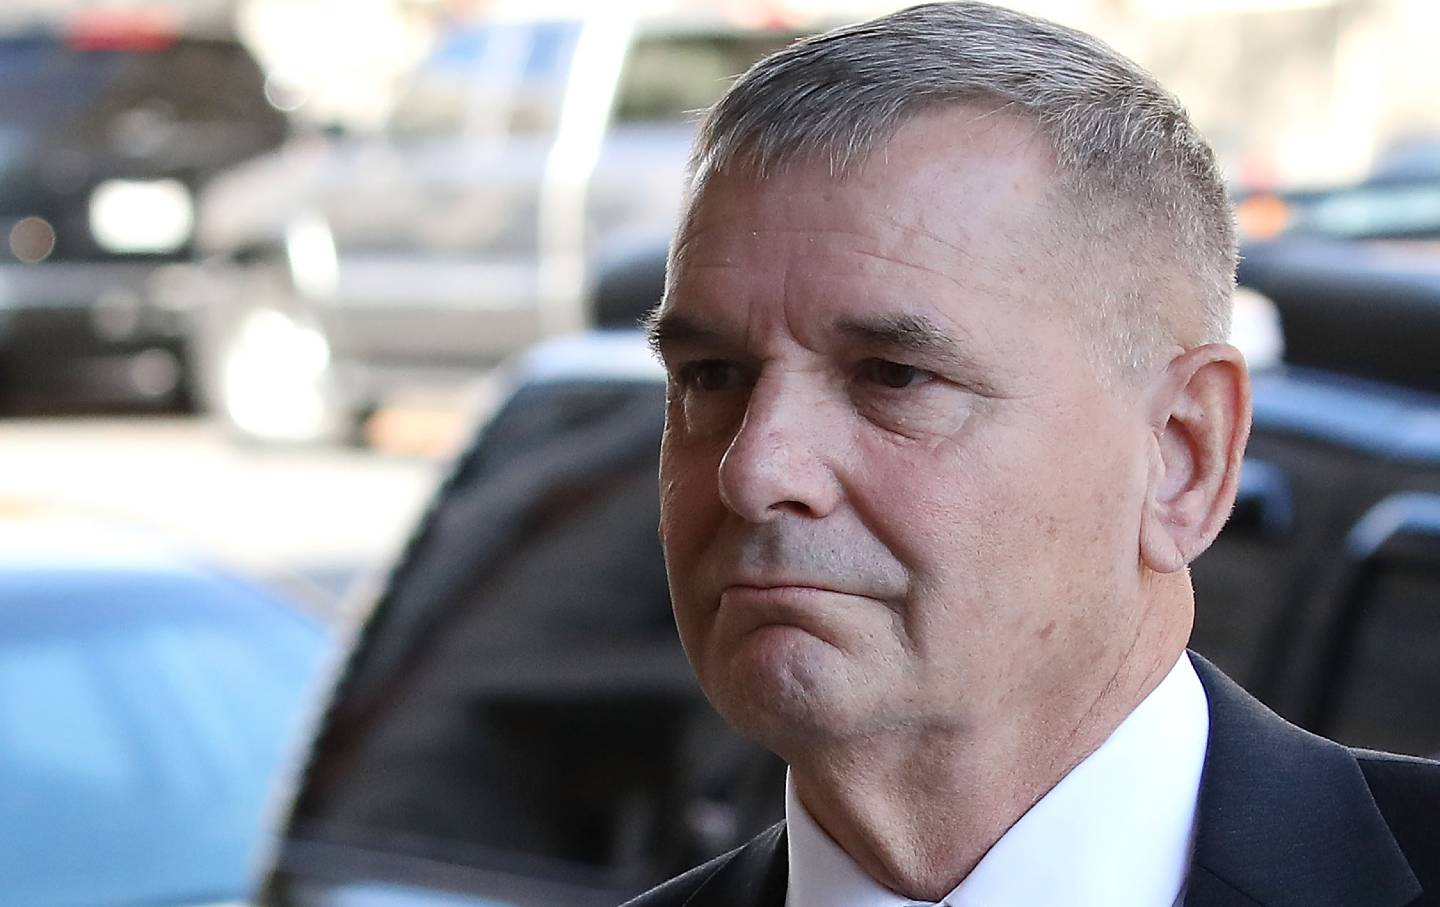 Retired Marine Gen. James Cartwright arrives for a hearing at US District Court, October 17, 2016 in Washington, DC. Cartwright was charged with making false statements during a federal investigation.